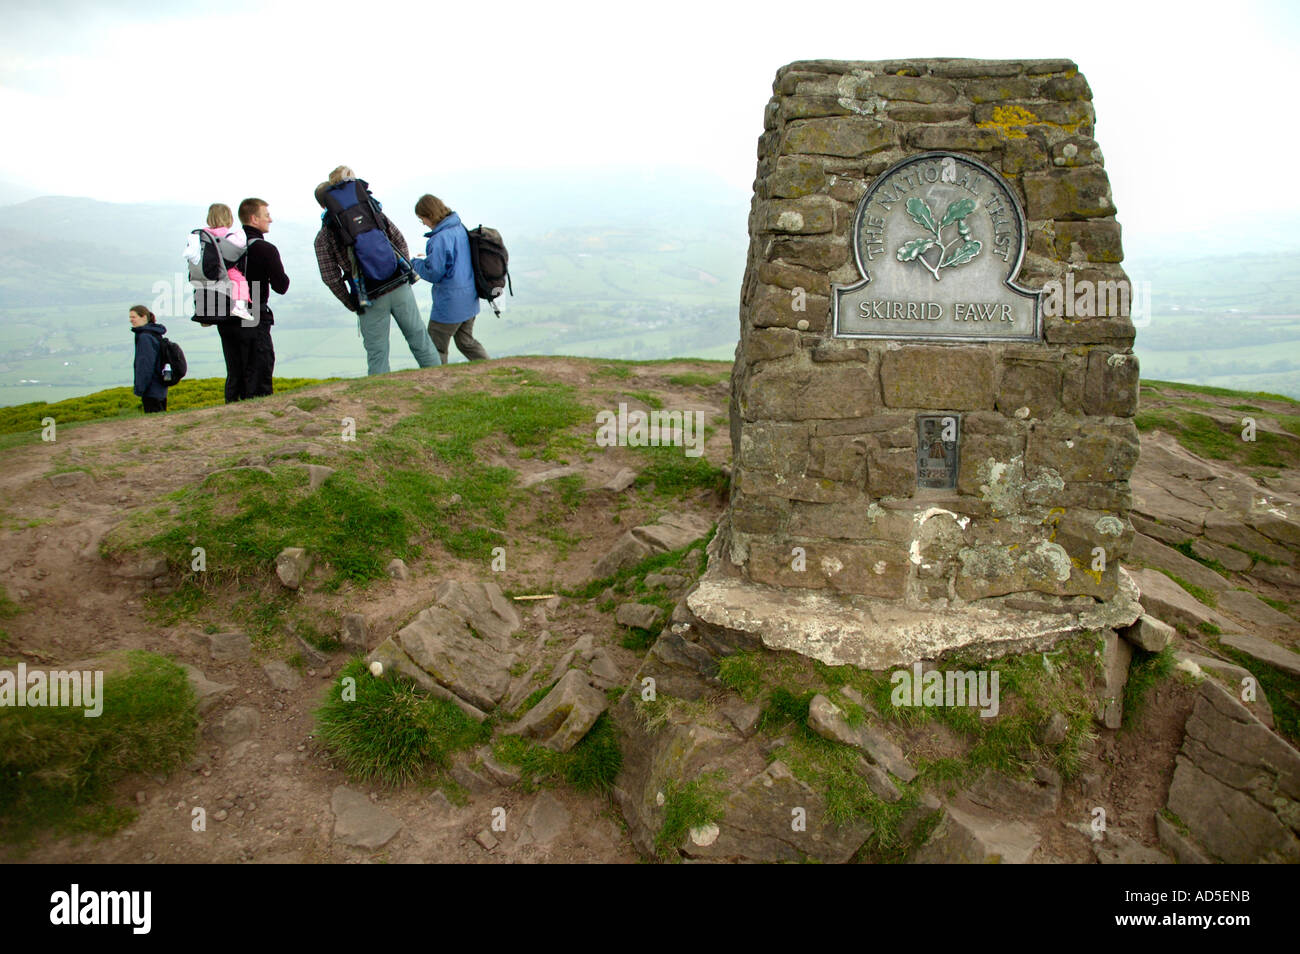 Family group of walkers on the summit of Skirrid Fawr mountain Abergavenny Monmouthshire South Wales UK Stock Photo